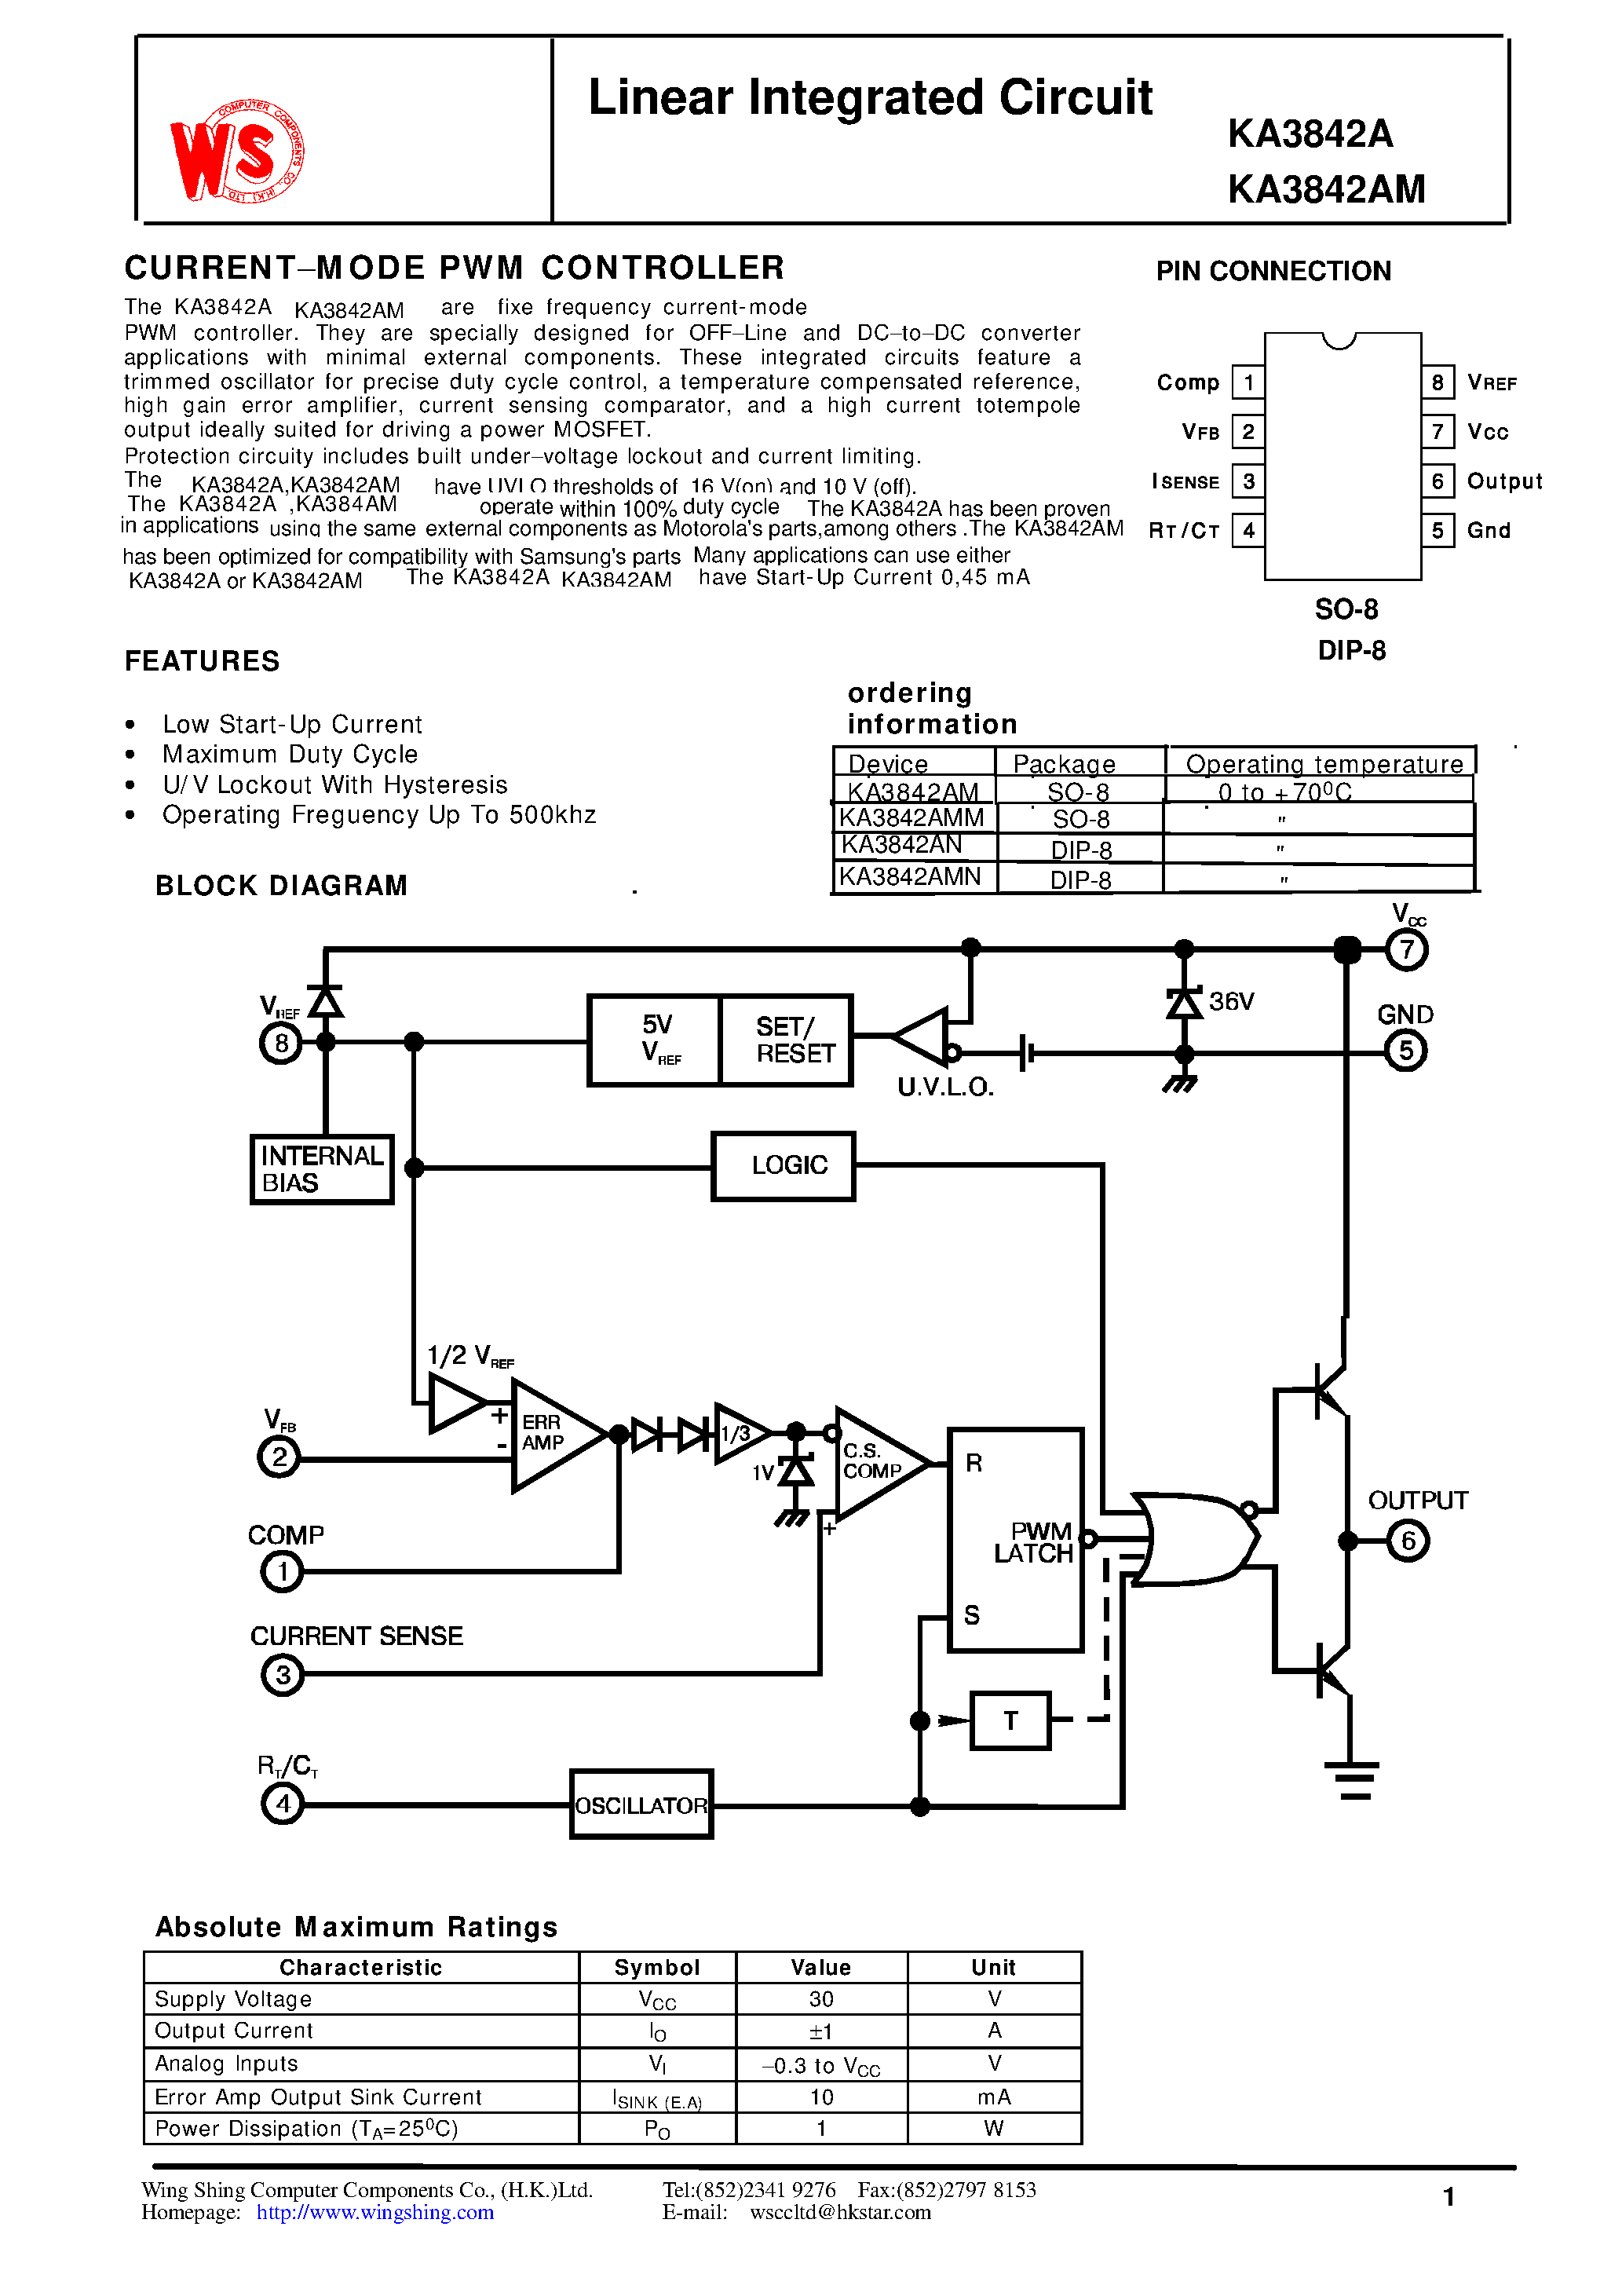 Datasheet KA3842AMM - Linear Integrated Circuit(CURRENT-MODE PWM CONTROLLER) page 1